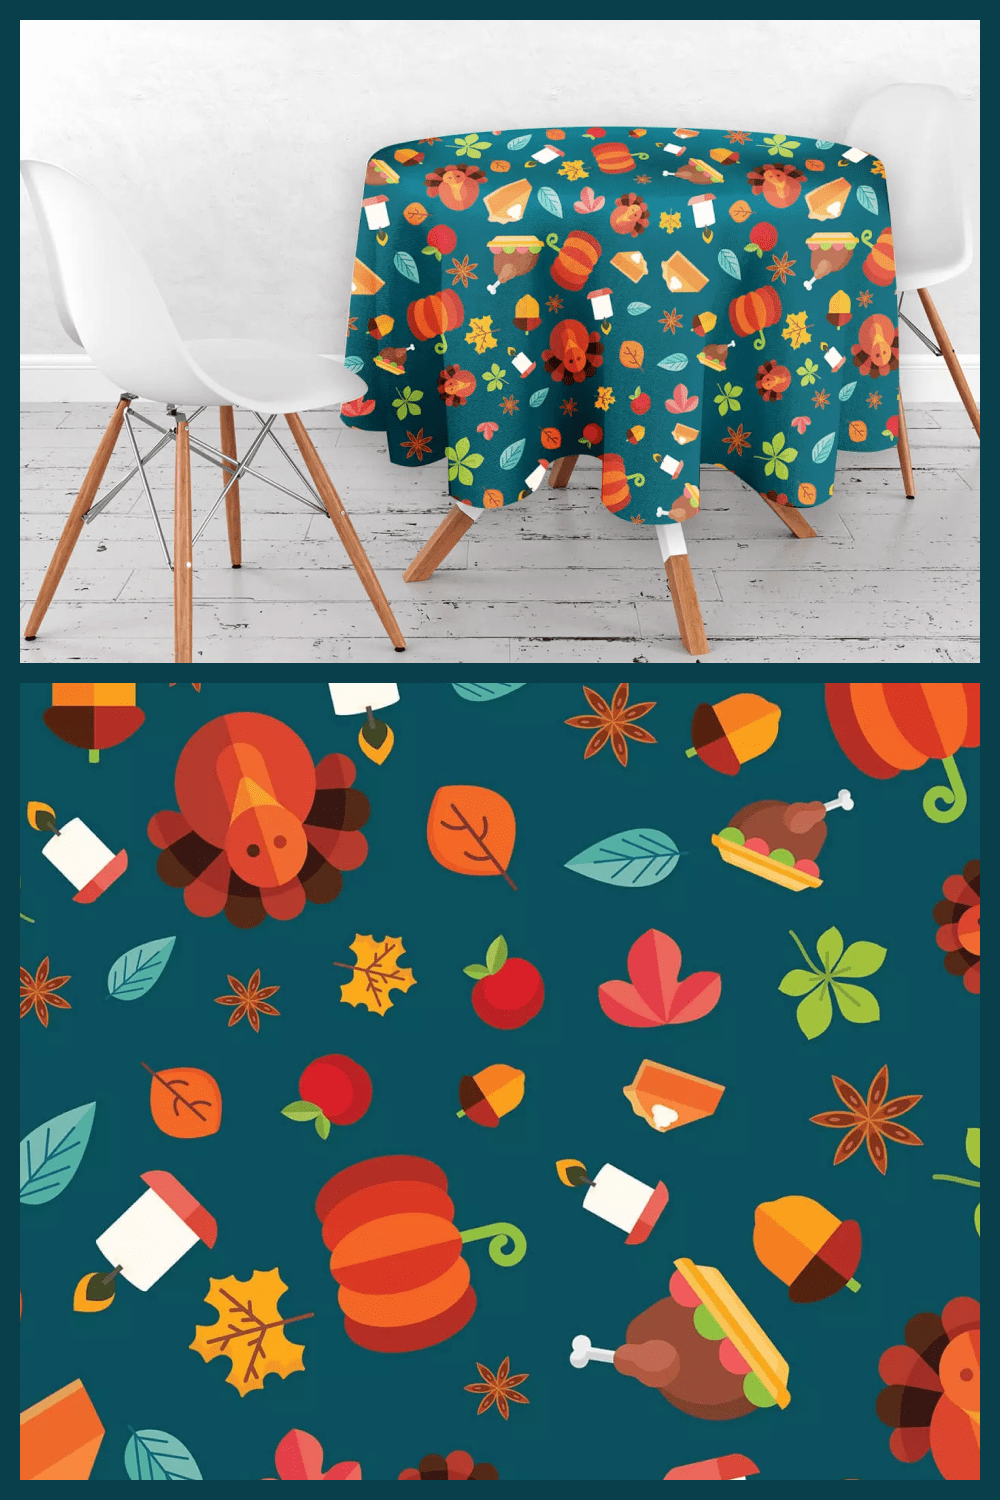 Chair and table with green tablecloth with drawings of pumpkins, leaves, acorns, turkey.